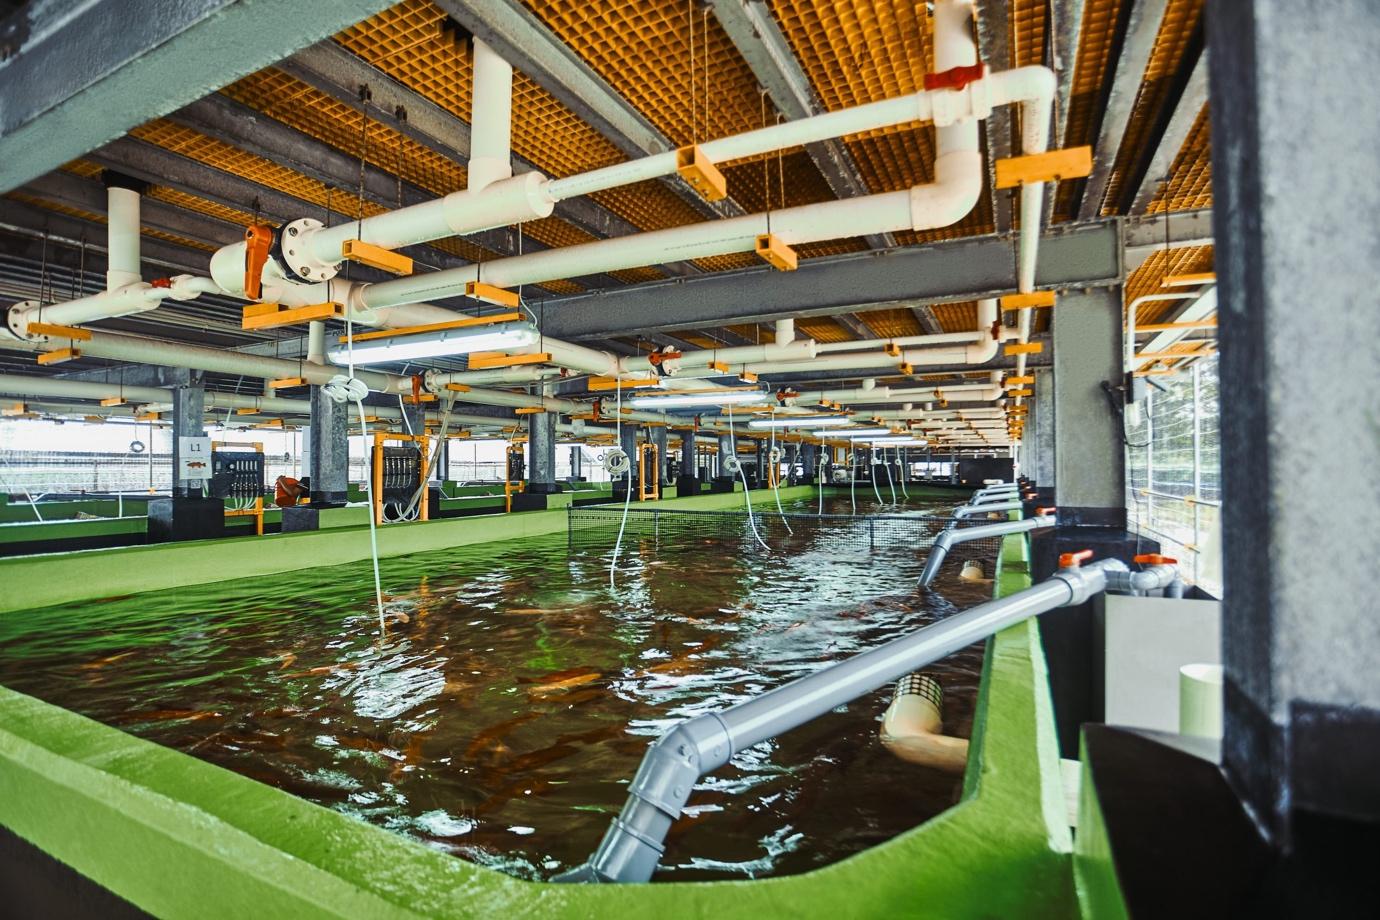 Apollo Aquaculture’s eight-story vertical fish farm is a testament of our high-tech farming credentials when it made the news around the world / Image Credit: GovInsider